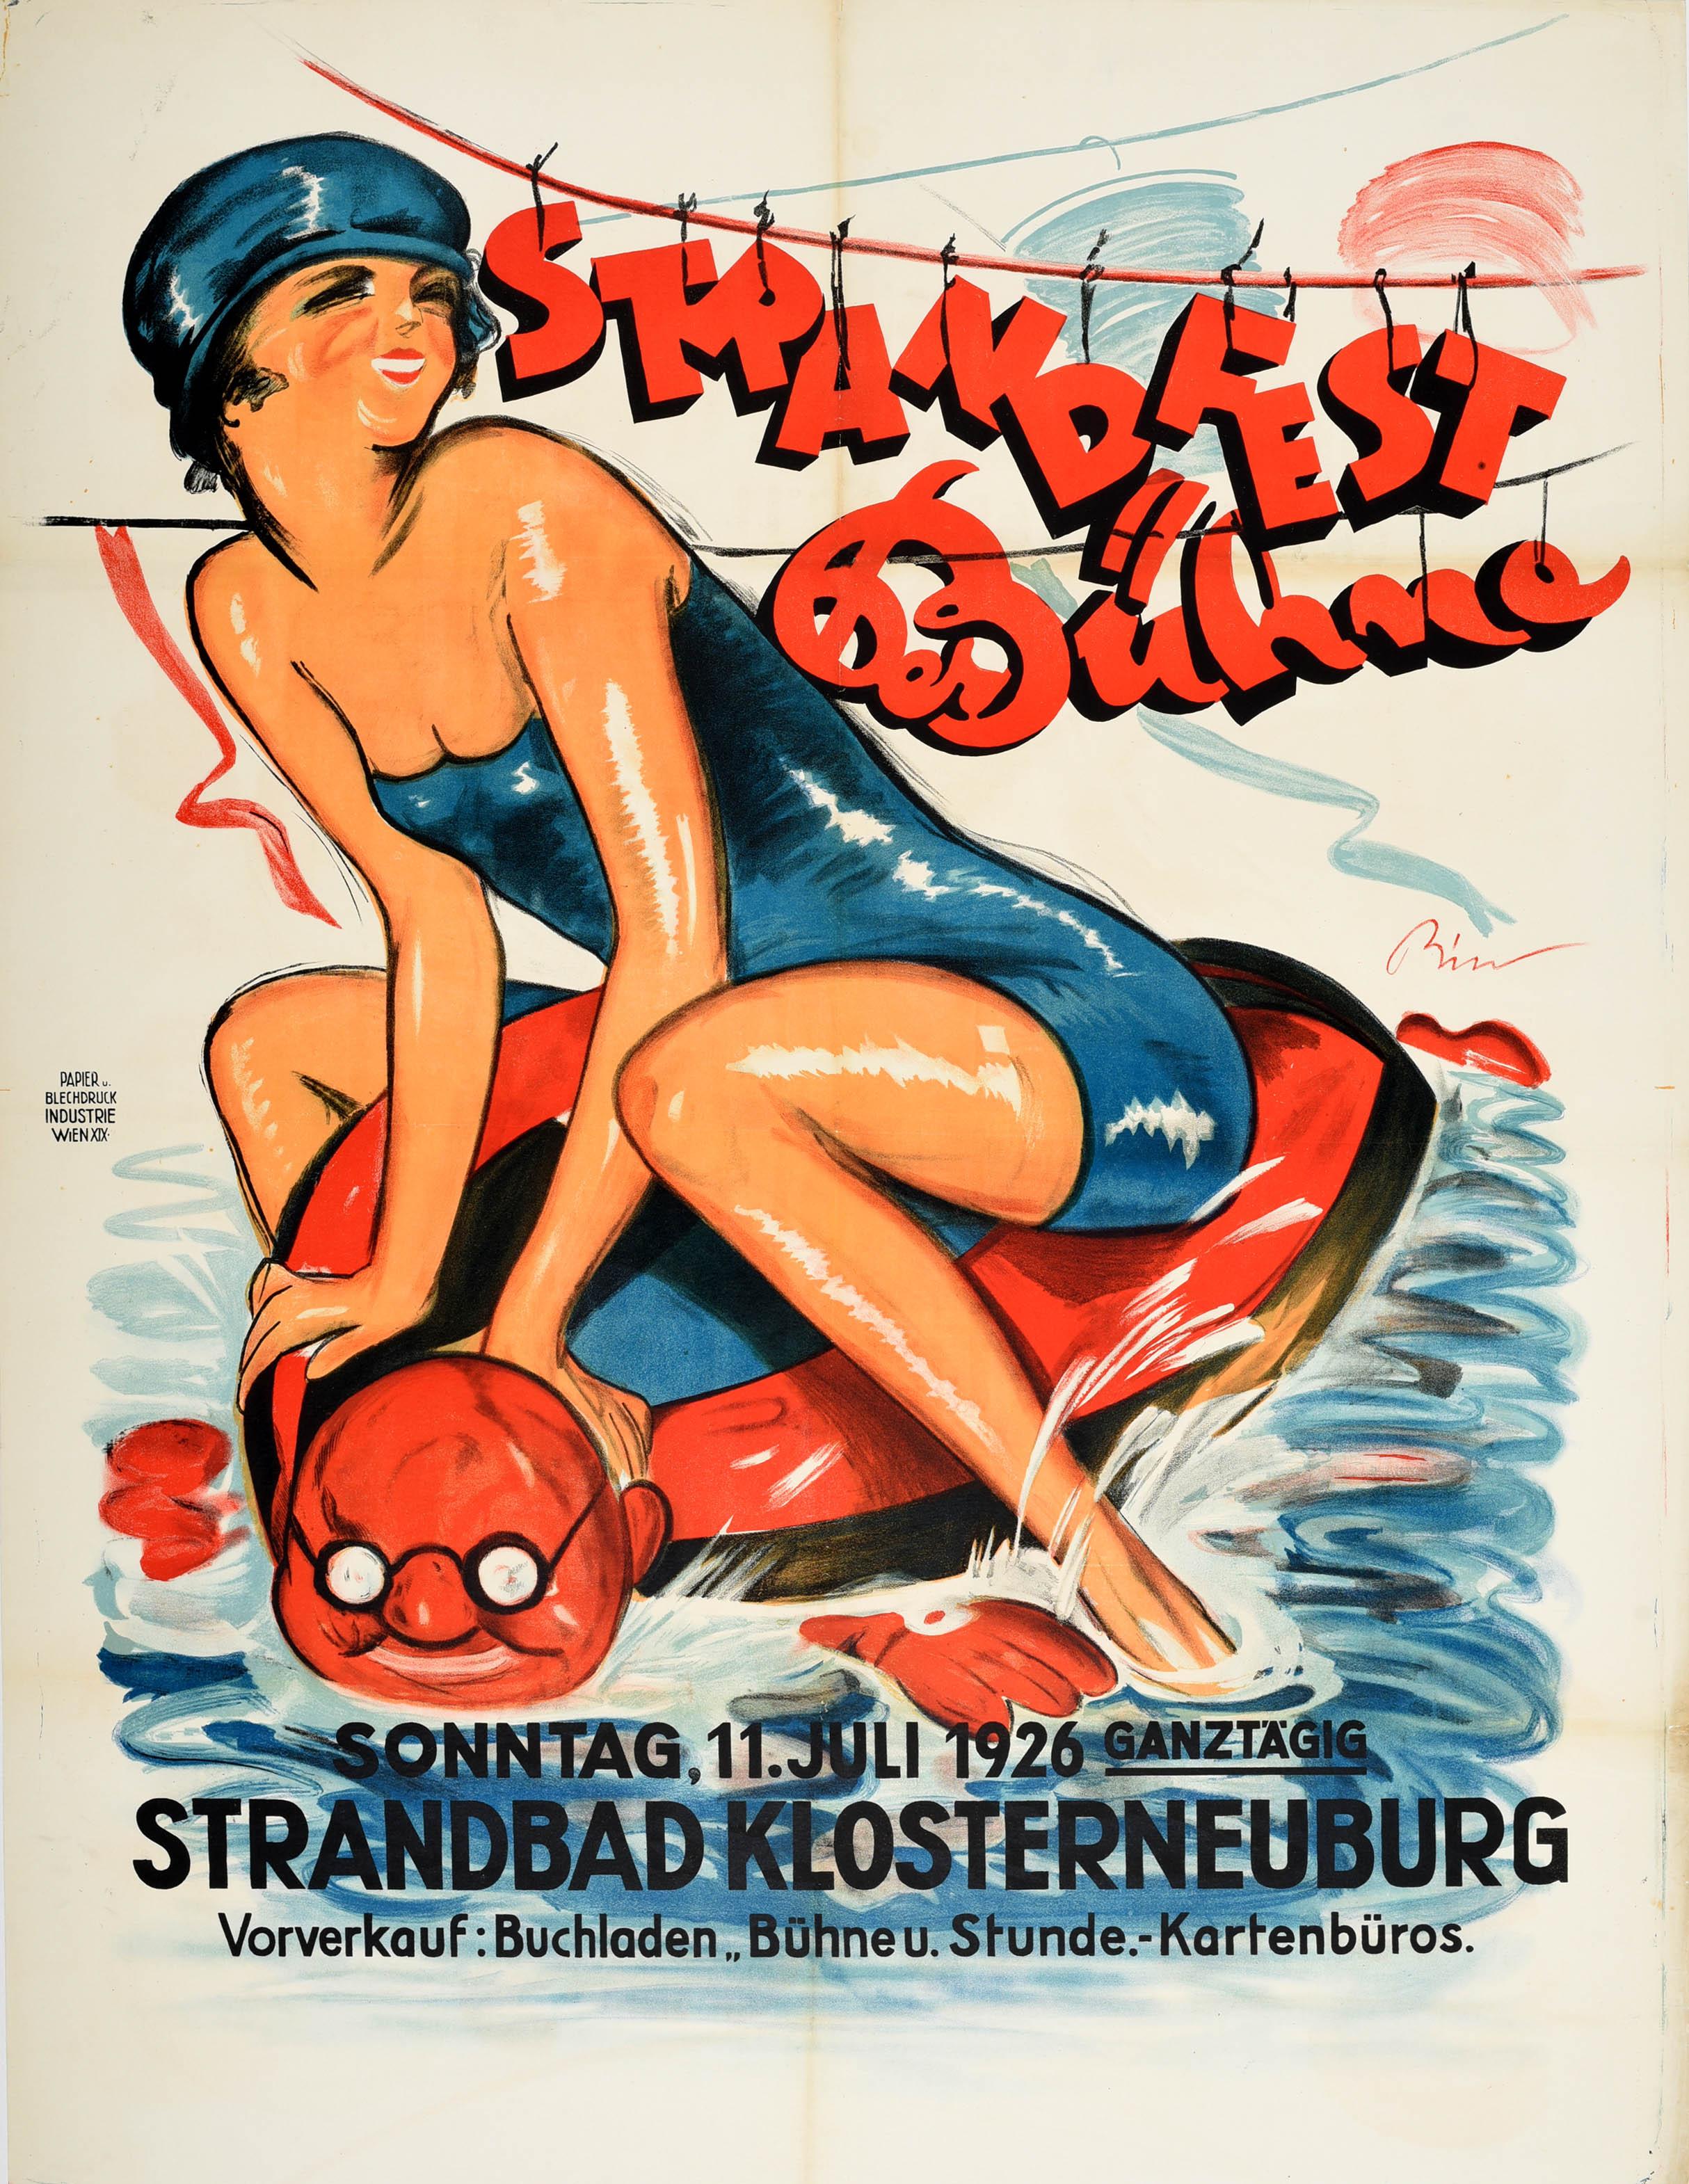 Original vintage travel poster advertising the Strandfest Buhne festival on Sunday 11 July 1926 at Strandbad Klosterneuburg featuring a fun design depicting a smiling lady in a fashionable swimming costume and cap sitting on an inflatable ring